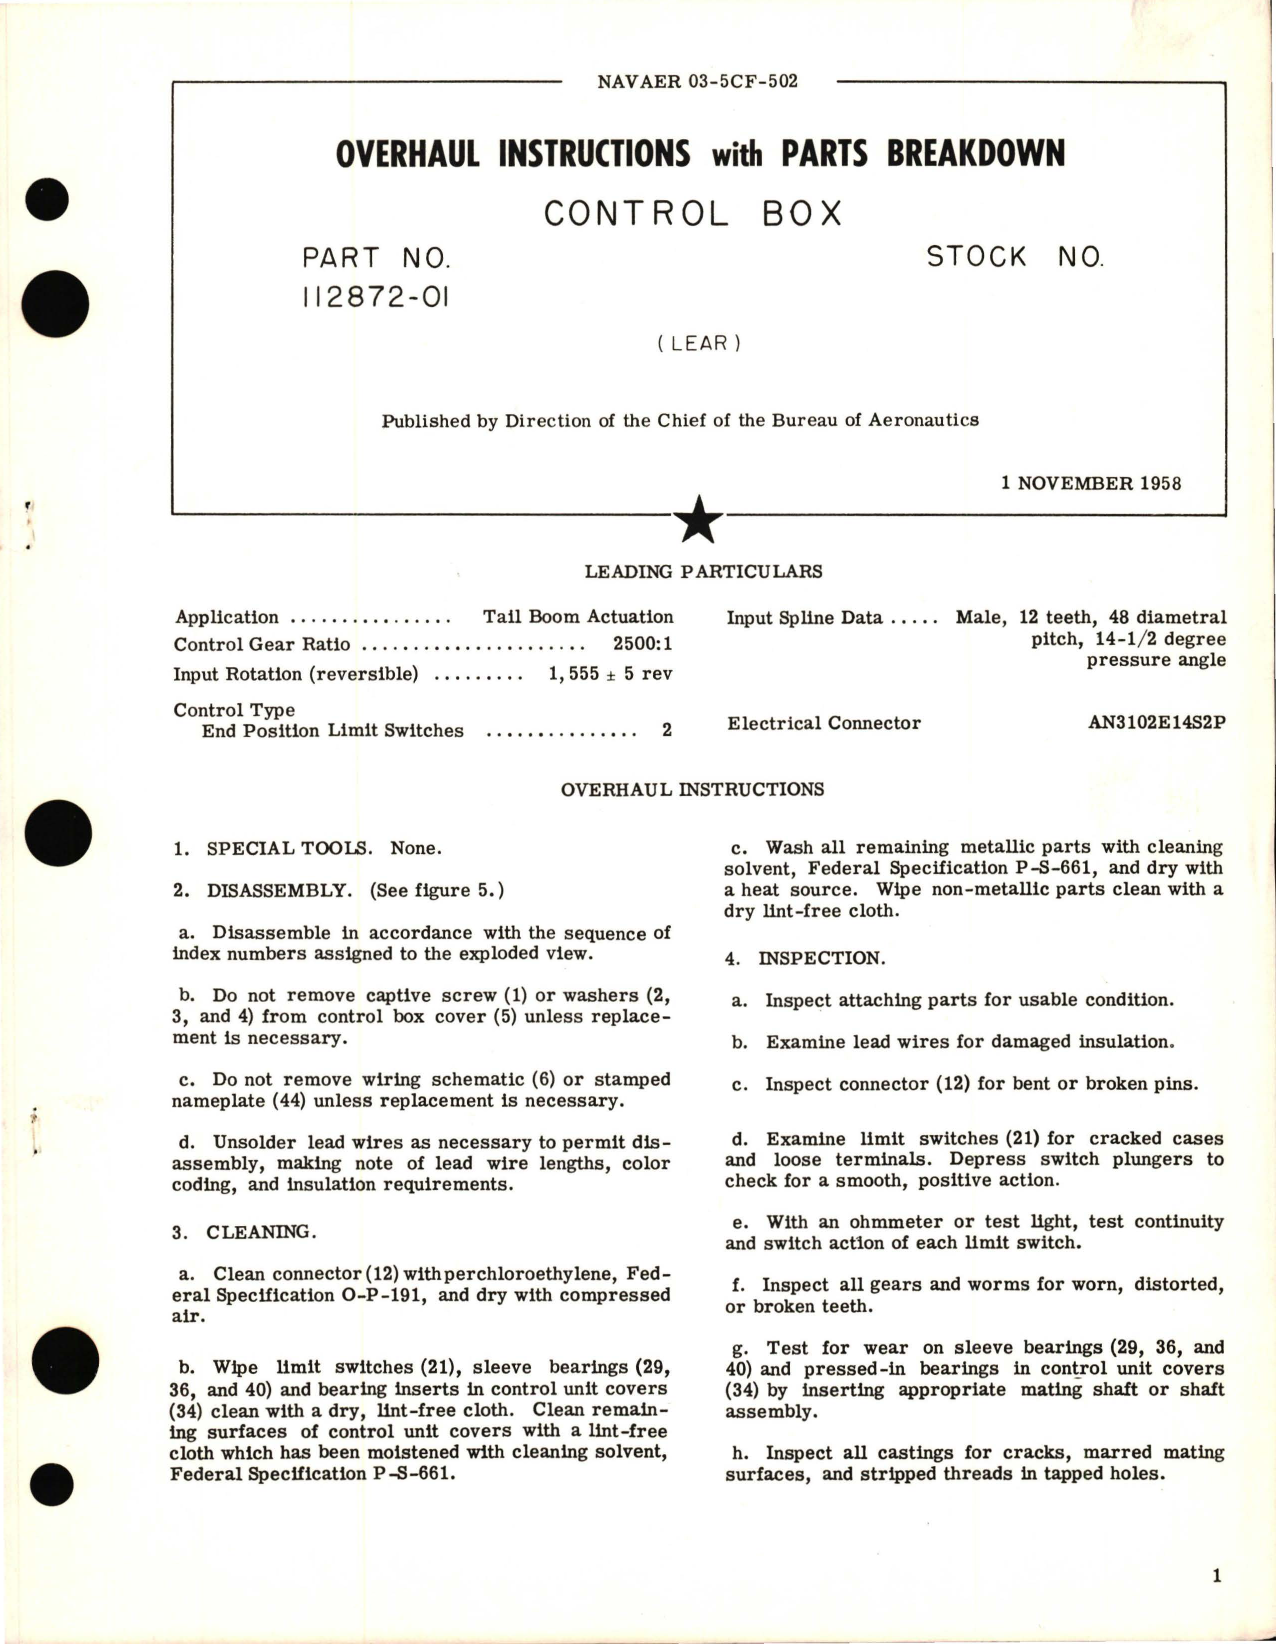 Sample page 1 from AirCorps Library document: Overhaul Instructions with Parts Breakdown for Control Box - Part 112872-01 